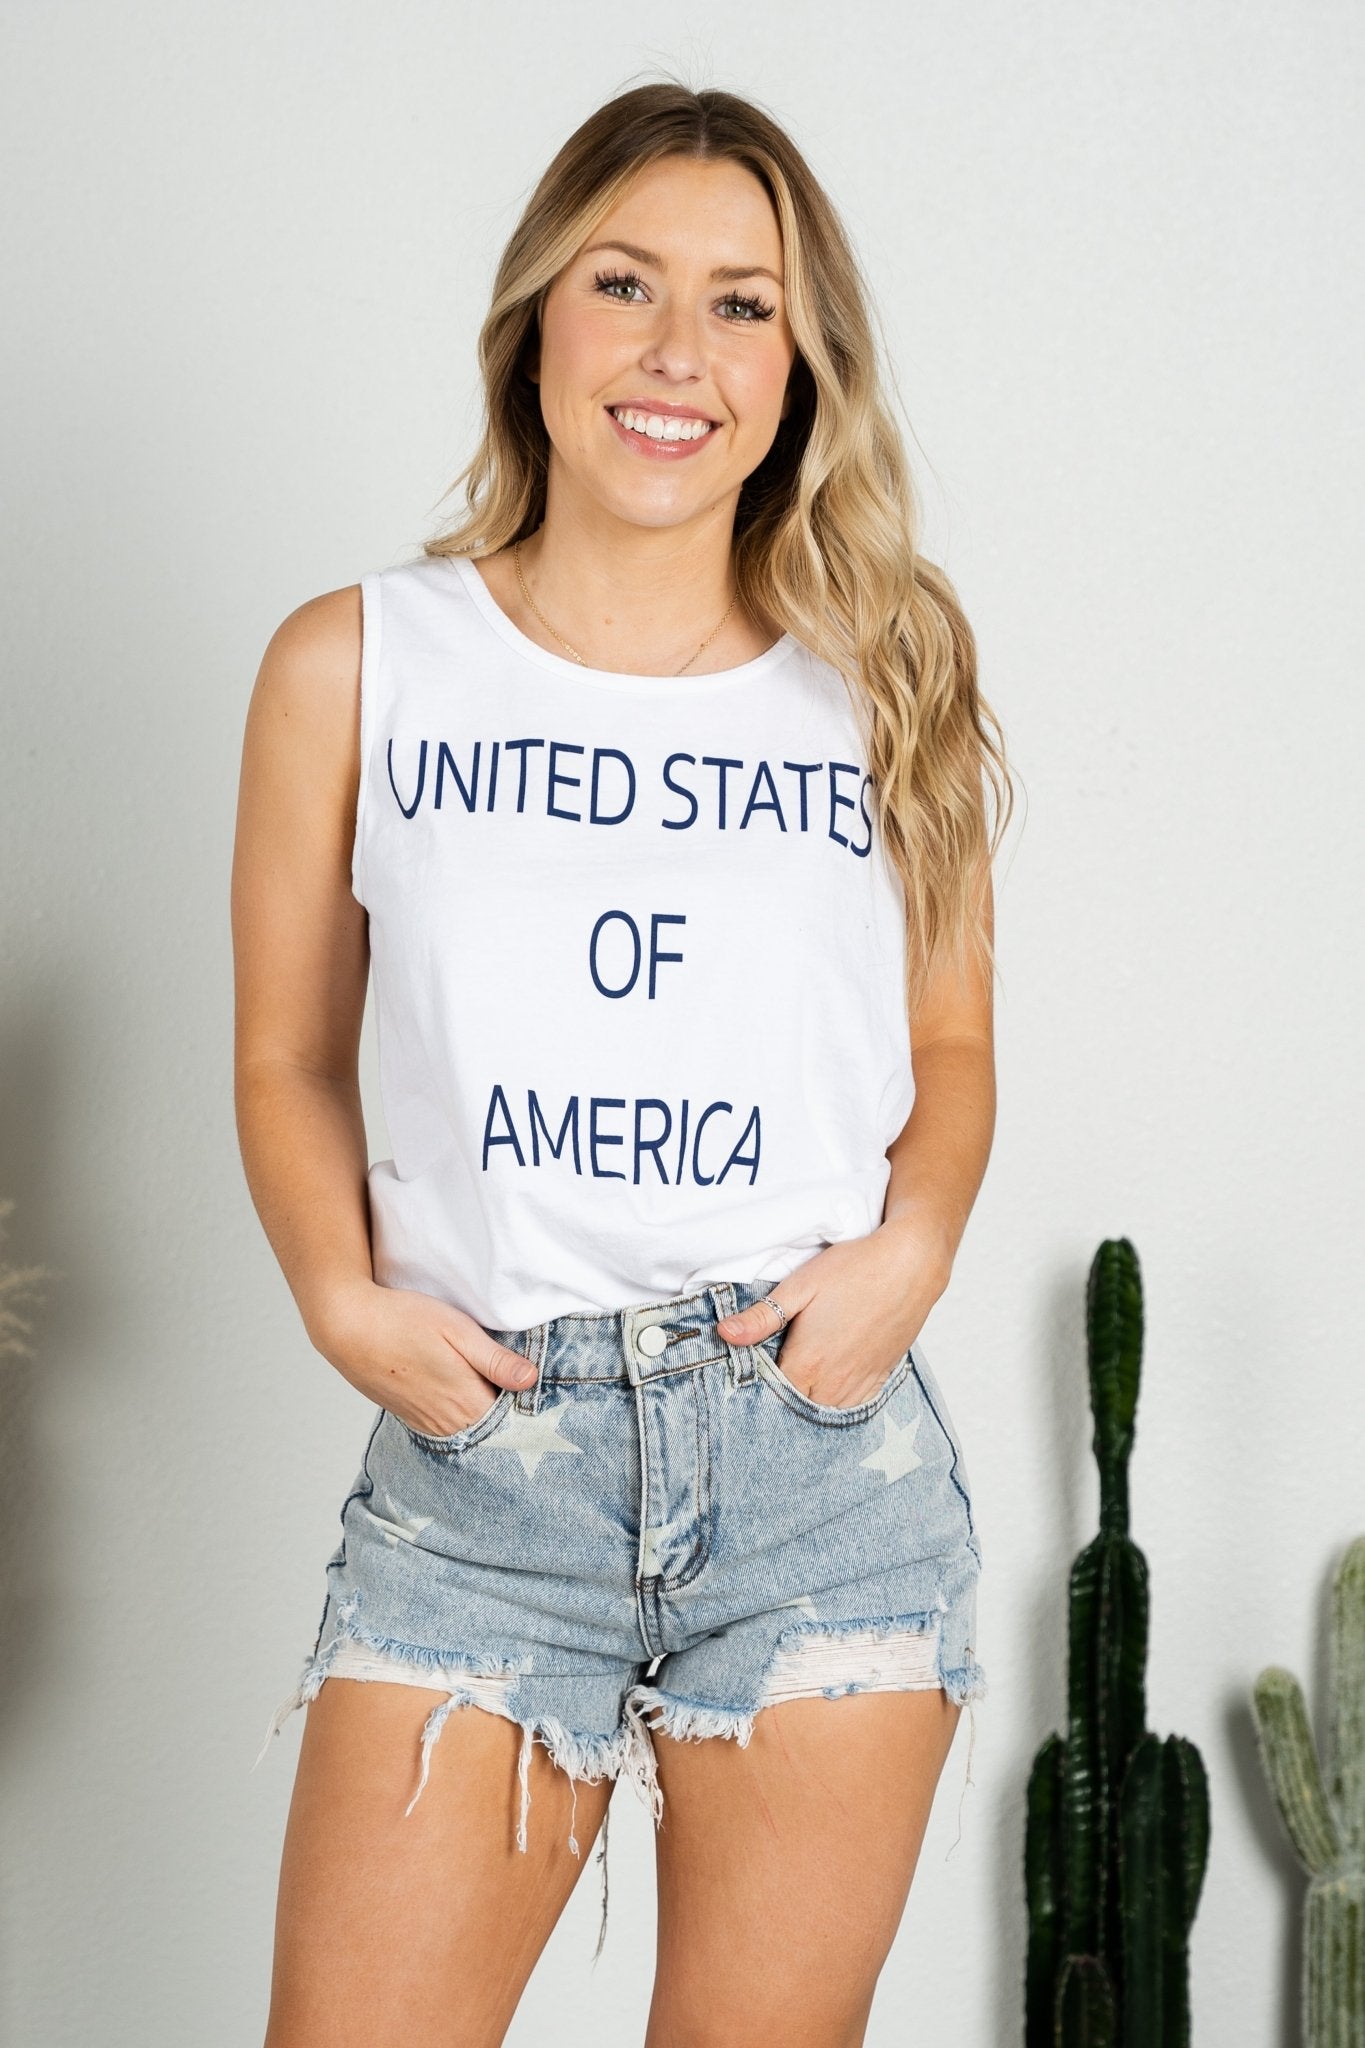 USA simple comfort colors tank top white - Stylish Tank Top - Trendy Graphic T-Shirts and Tank Tops at Lush Fashion Lounge Boutique in Oklahoma City